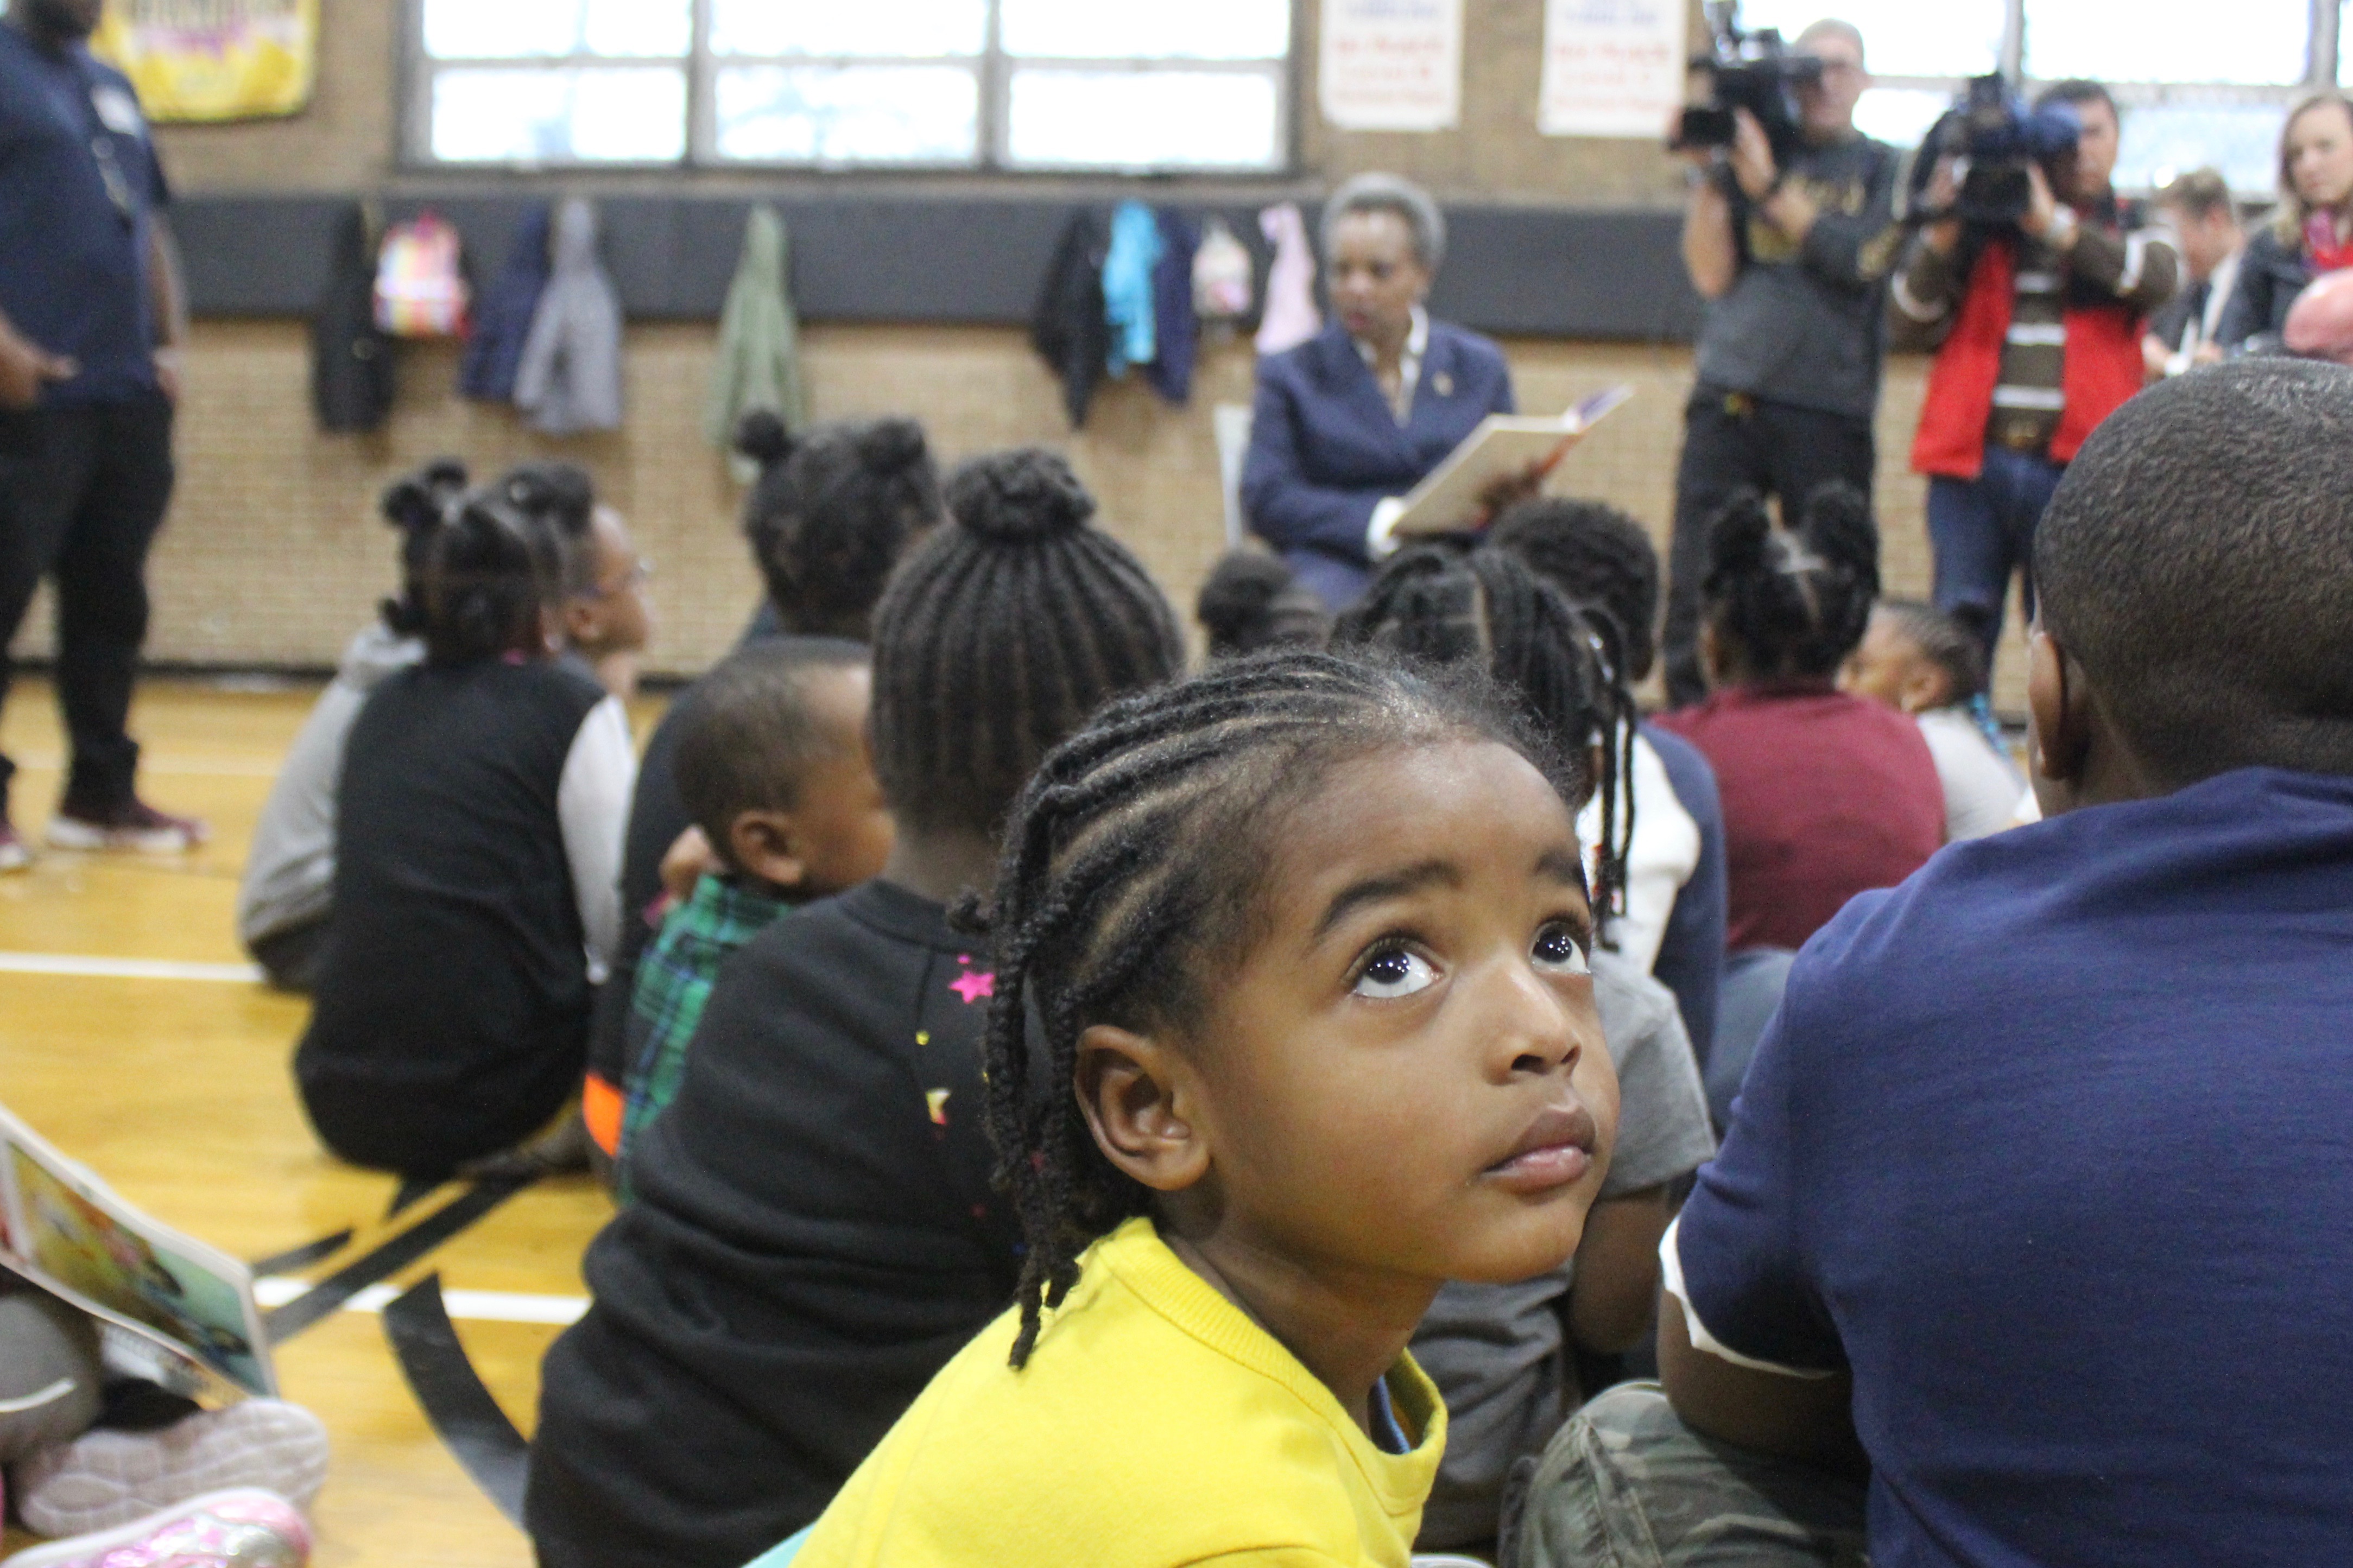 A student spending Wednesday morning at Kennicott Park in Kenwood glances up at media cameras as Mayor Lori Lightfoot reads a book aloud to a group of children during the 10th day of the teachers strike.